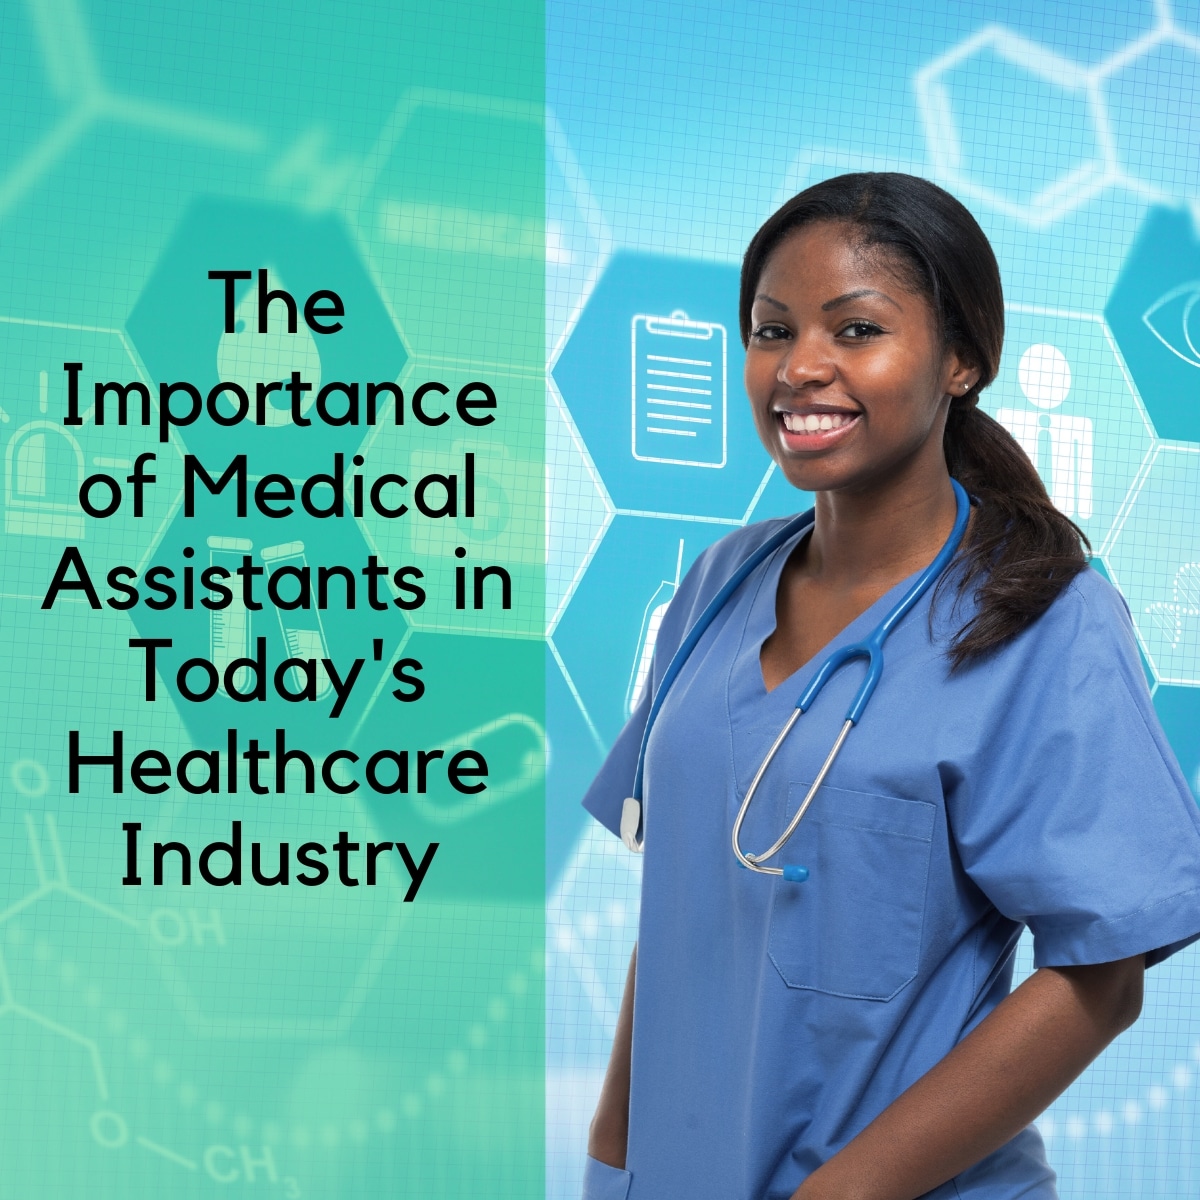 The Importance of Medical Assistants in Today's Healthcare Industry